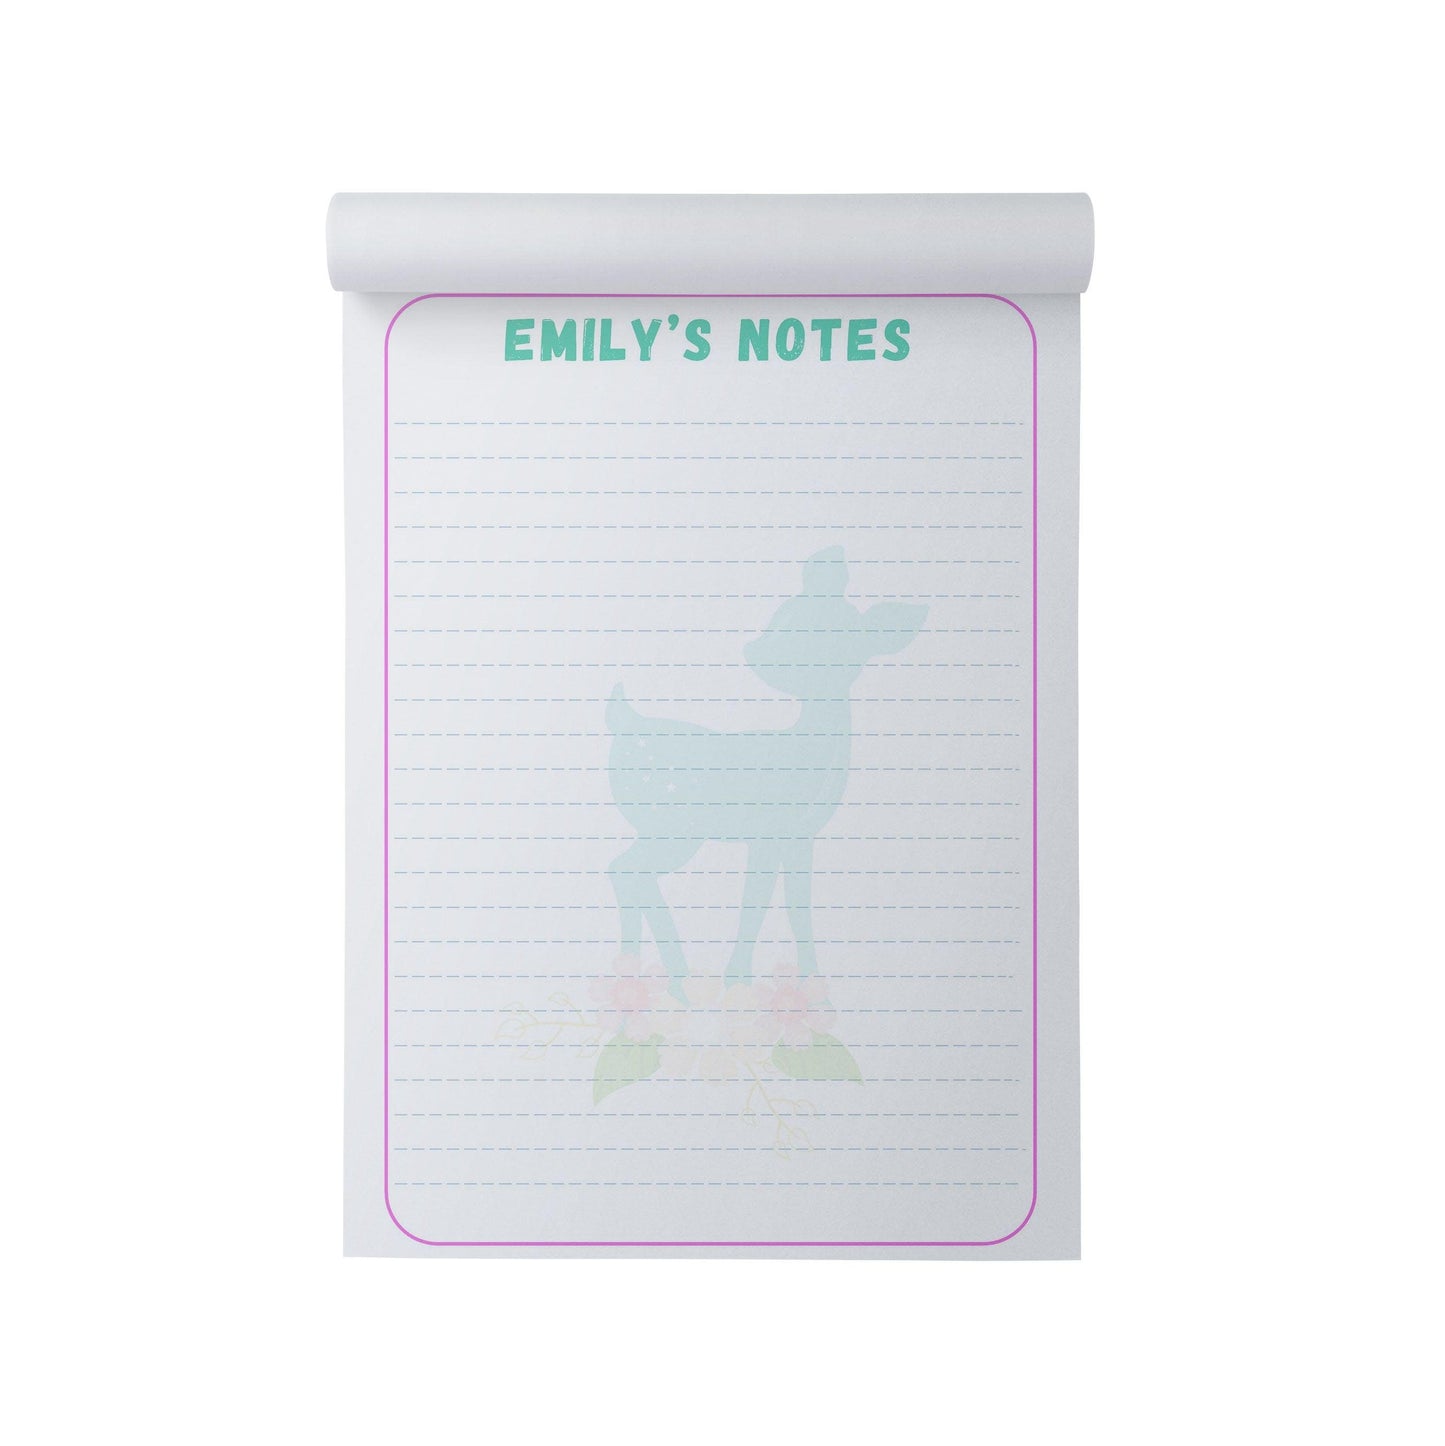  Deer Personalised Note Pad, A5 With 50 Tear-off Sheets by PMPRINTED 